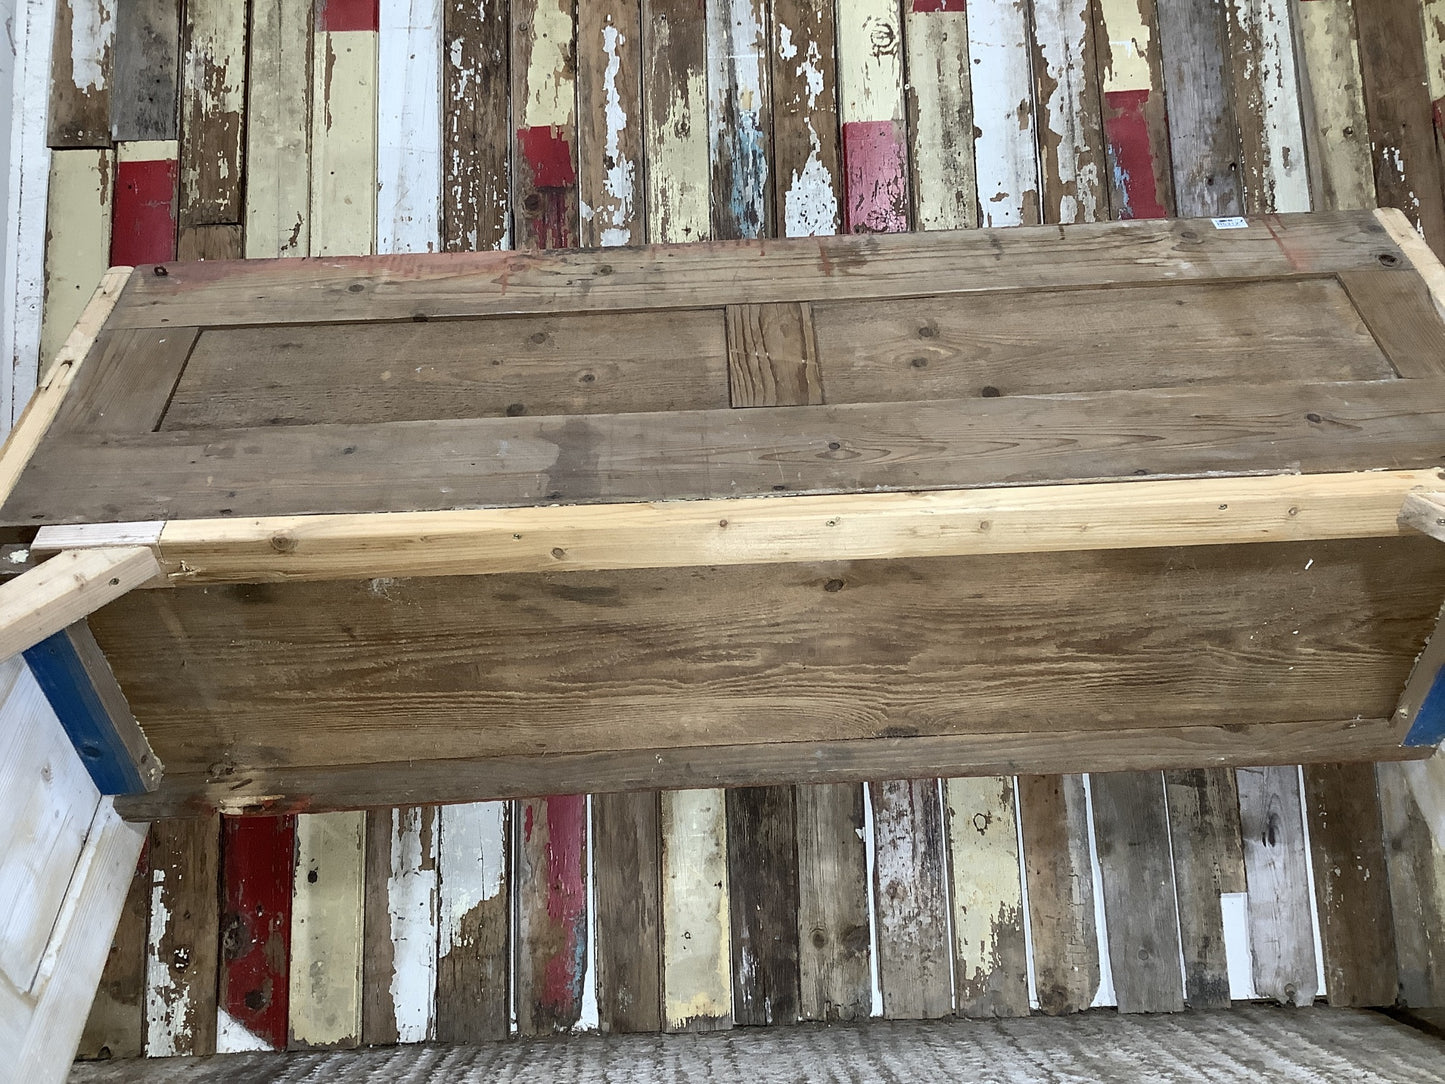 5'8" Old Rustic Hand Painted Pine Settle Pew Wooden